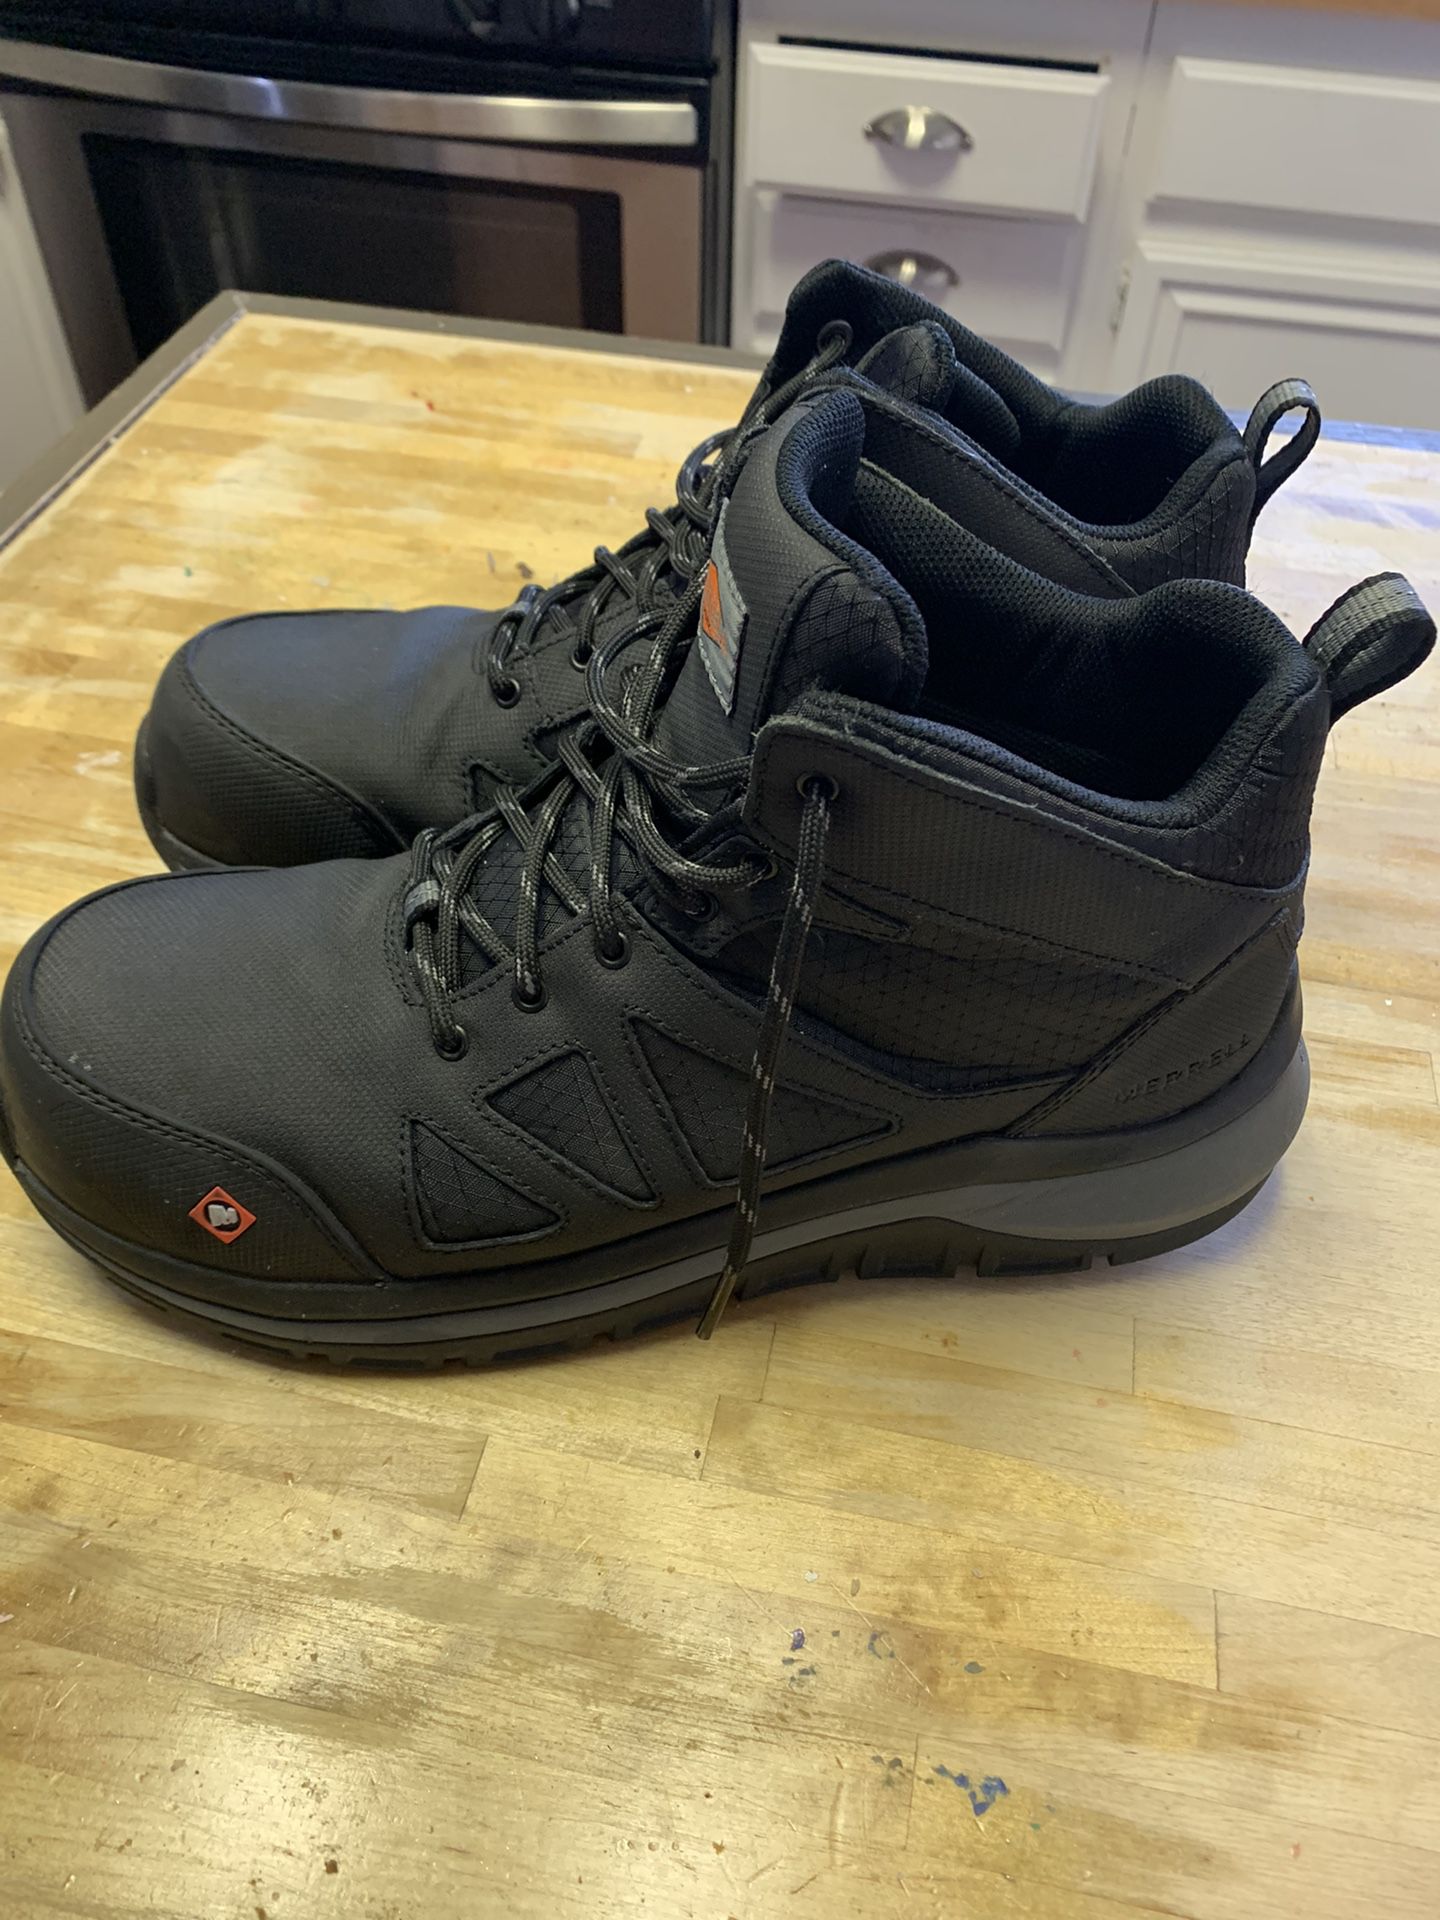 Merrell  Work Boots Steal Toe Size  10